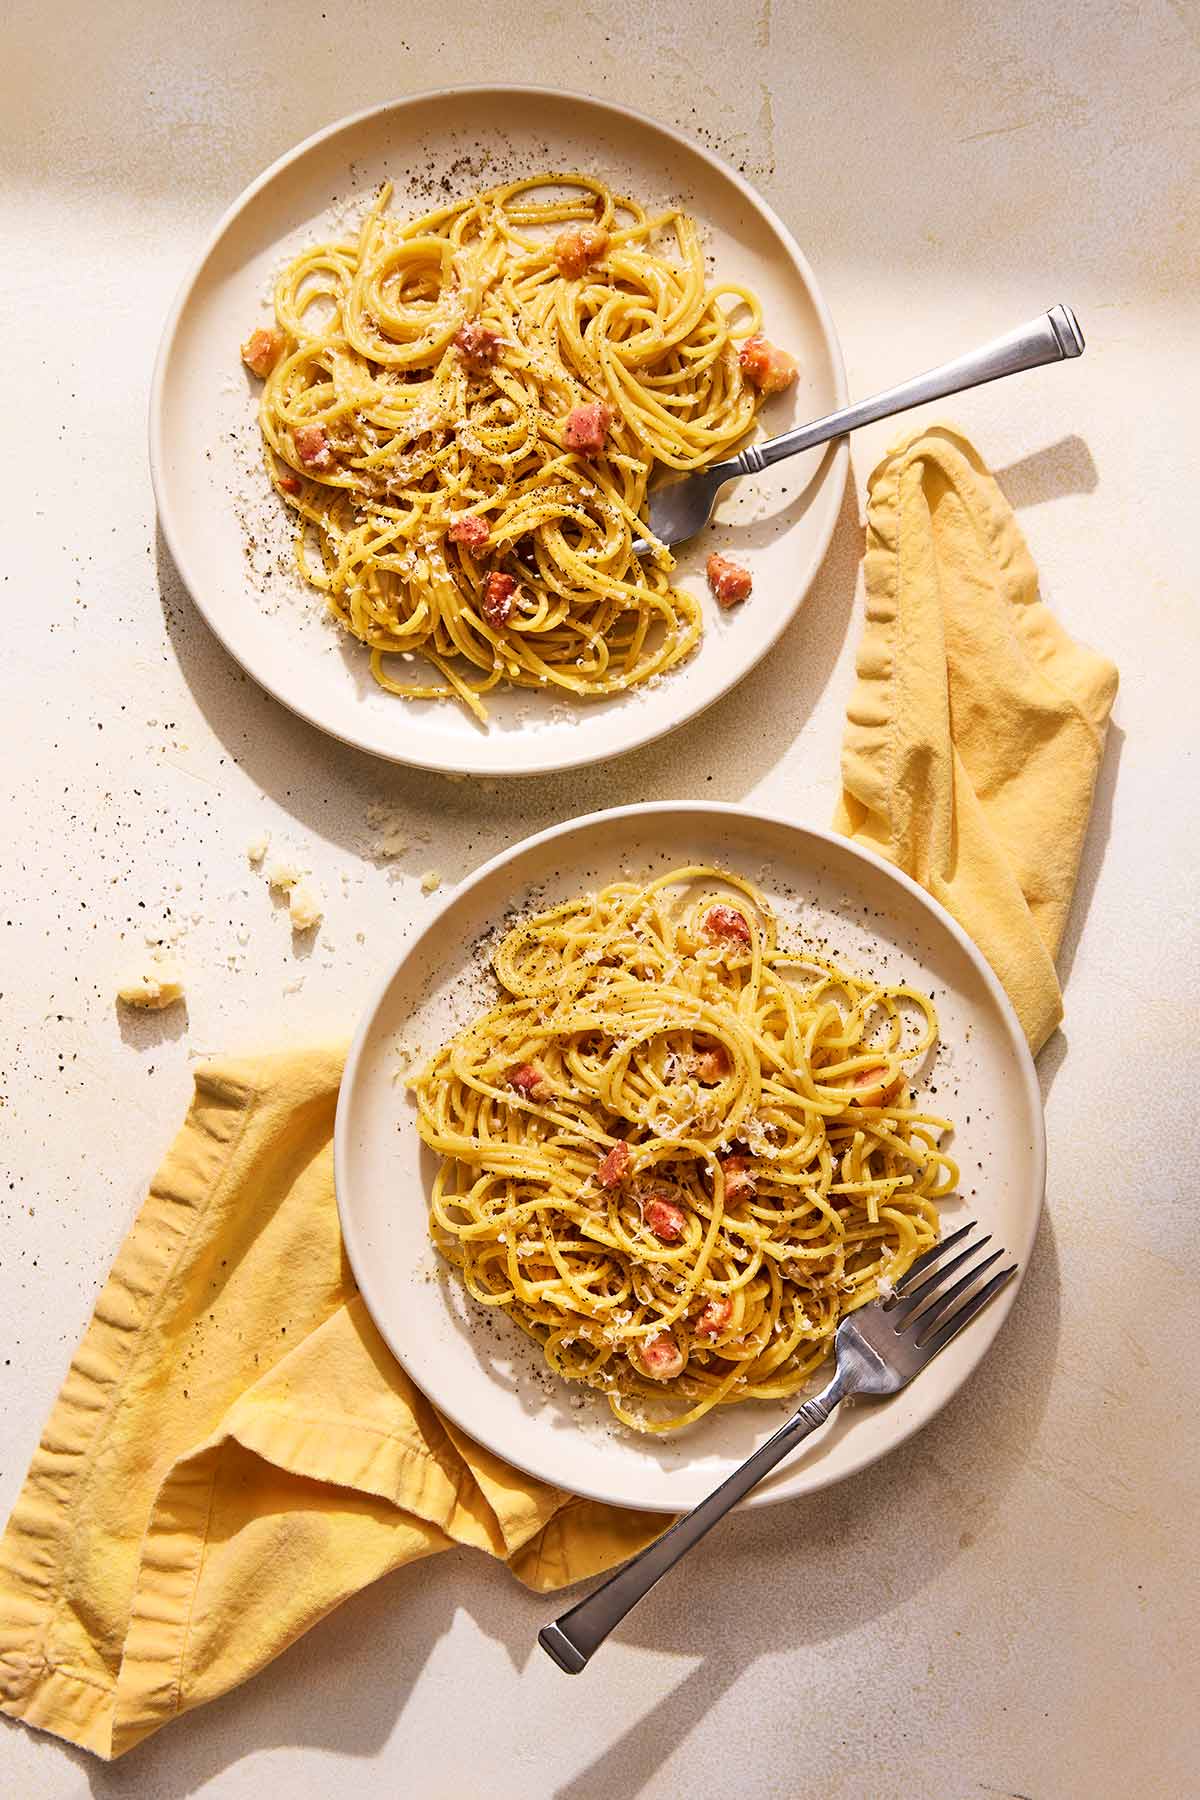 Two plates of spaghetti alla carbonara with cubed guanciale.